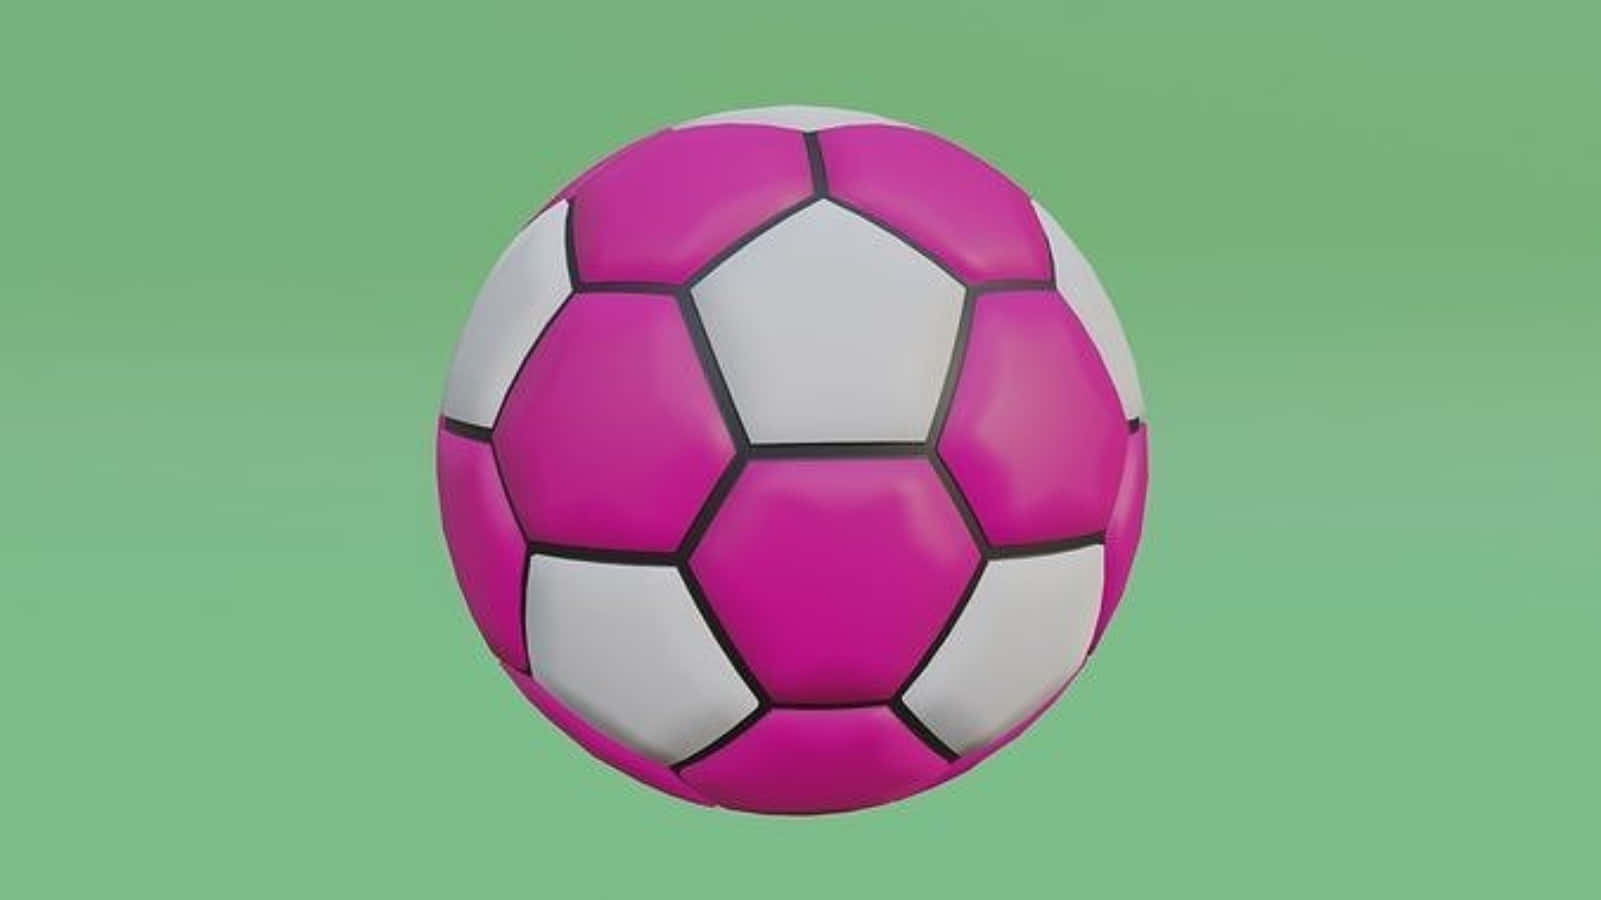 Caption: A vibrant pink soccer ball shining on the field Wallpaper